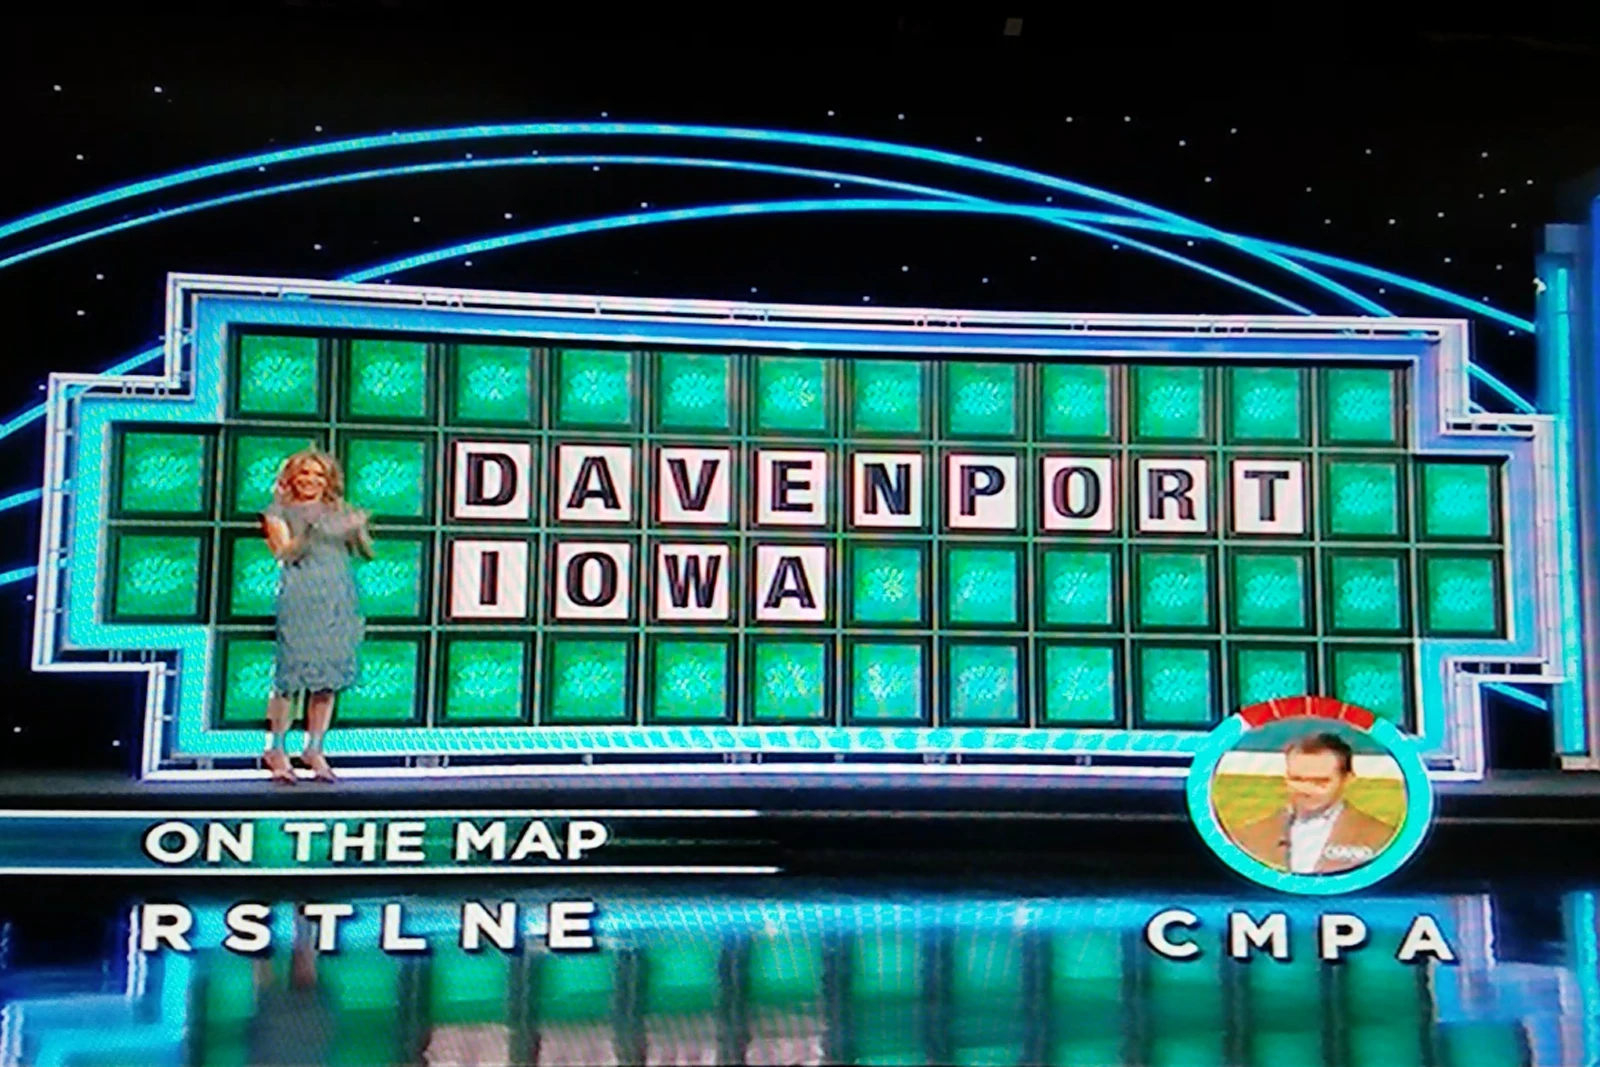 wheel of fortune puzzle pop support